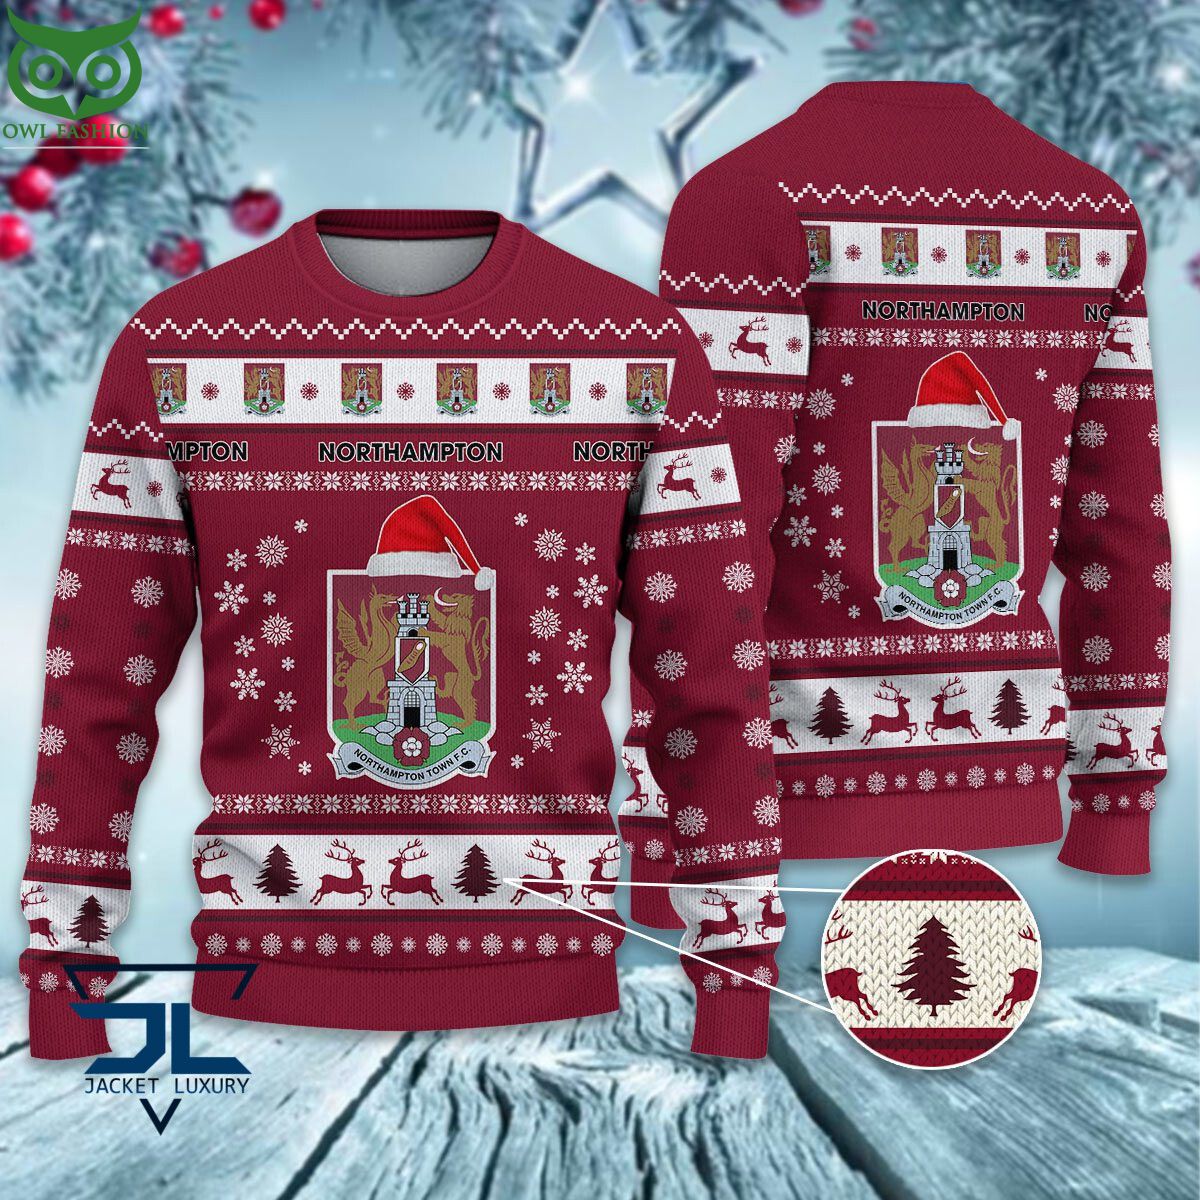 trending northampton town f c epl league cup new ugly sweater 1 dbr3z.jpg